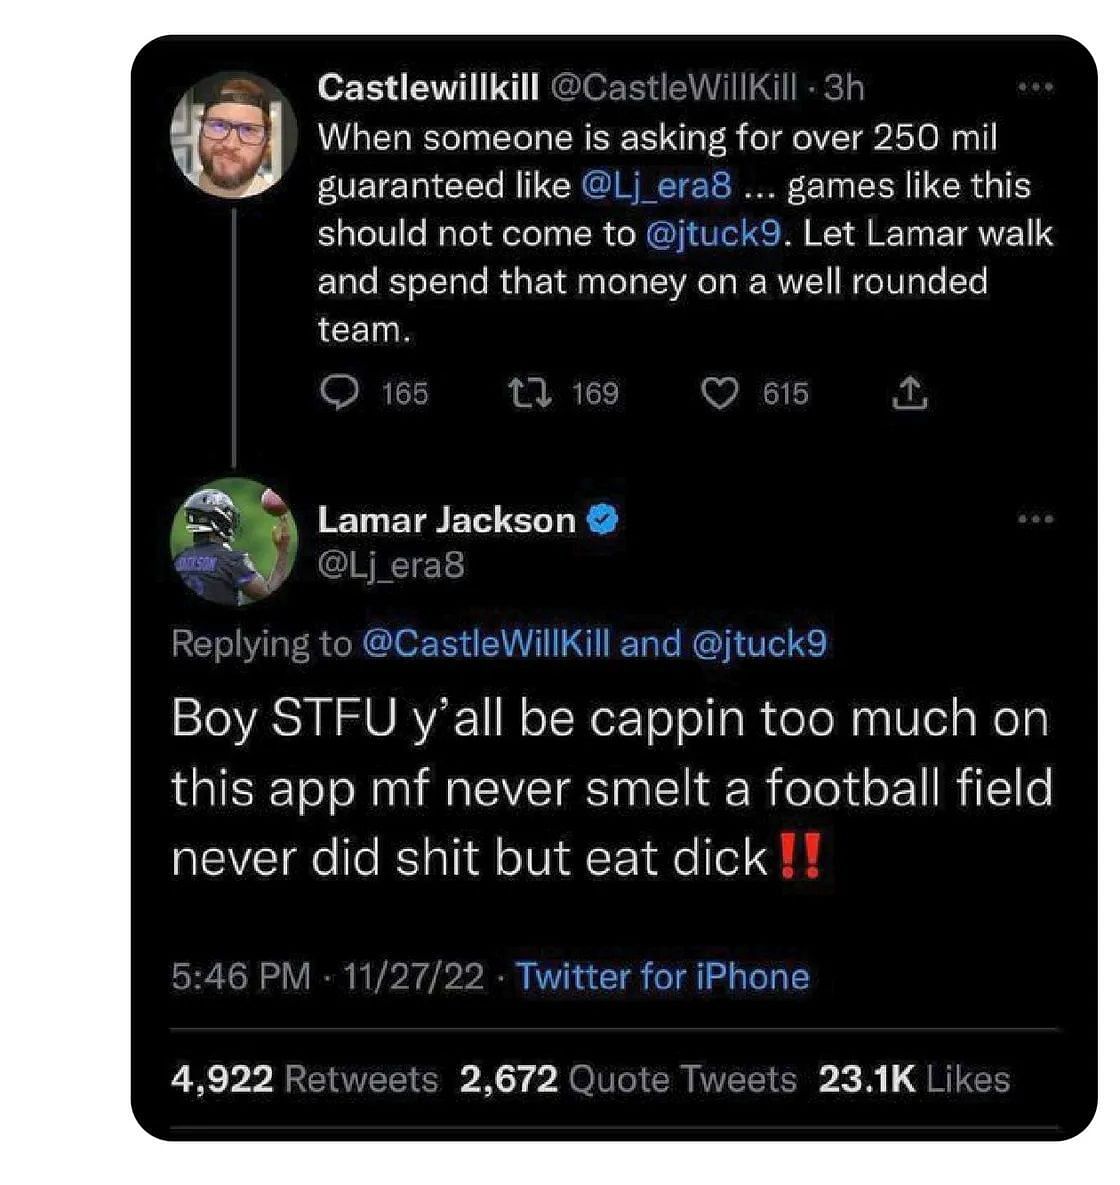 Lamar Jackson getting into a Twitter beef with a fan. Photo via www.outsports.com